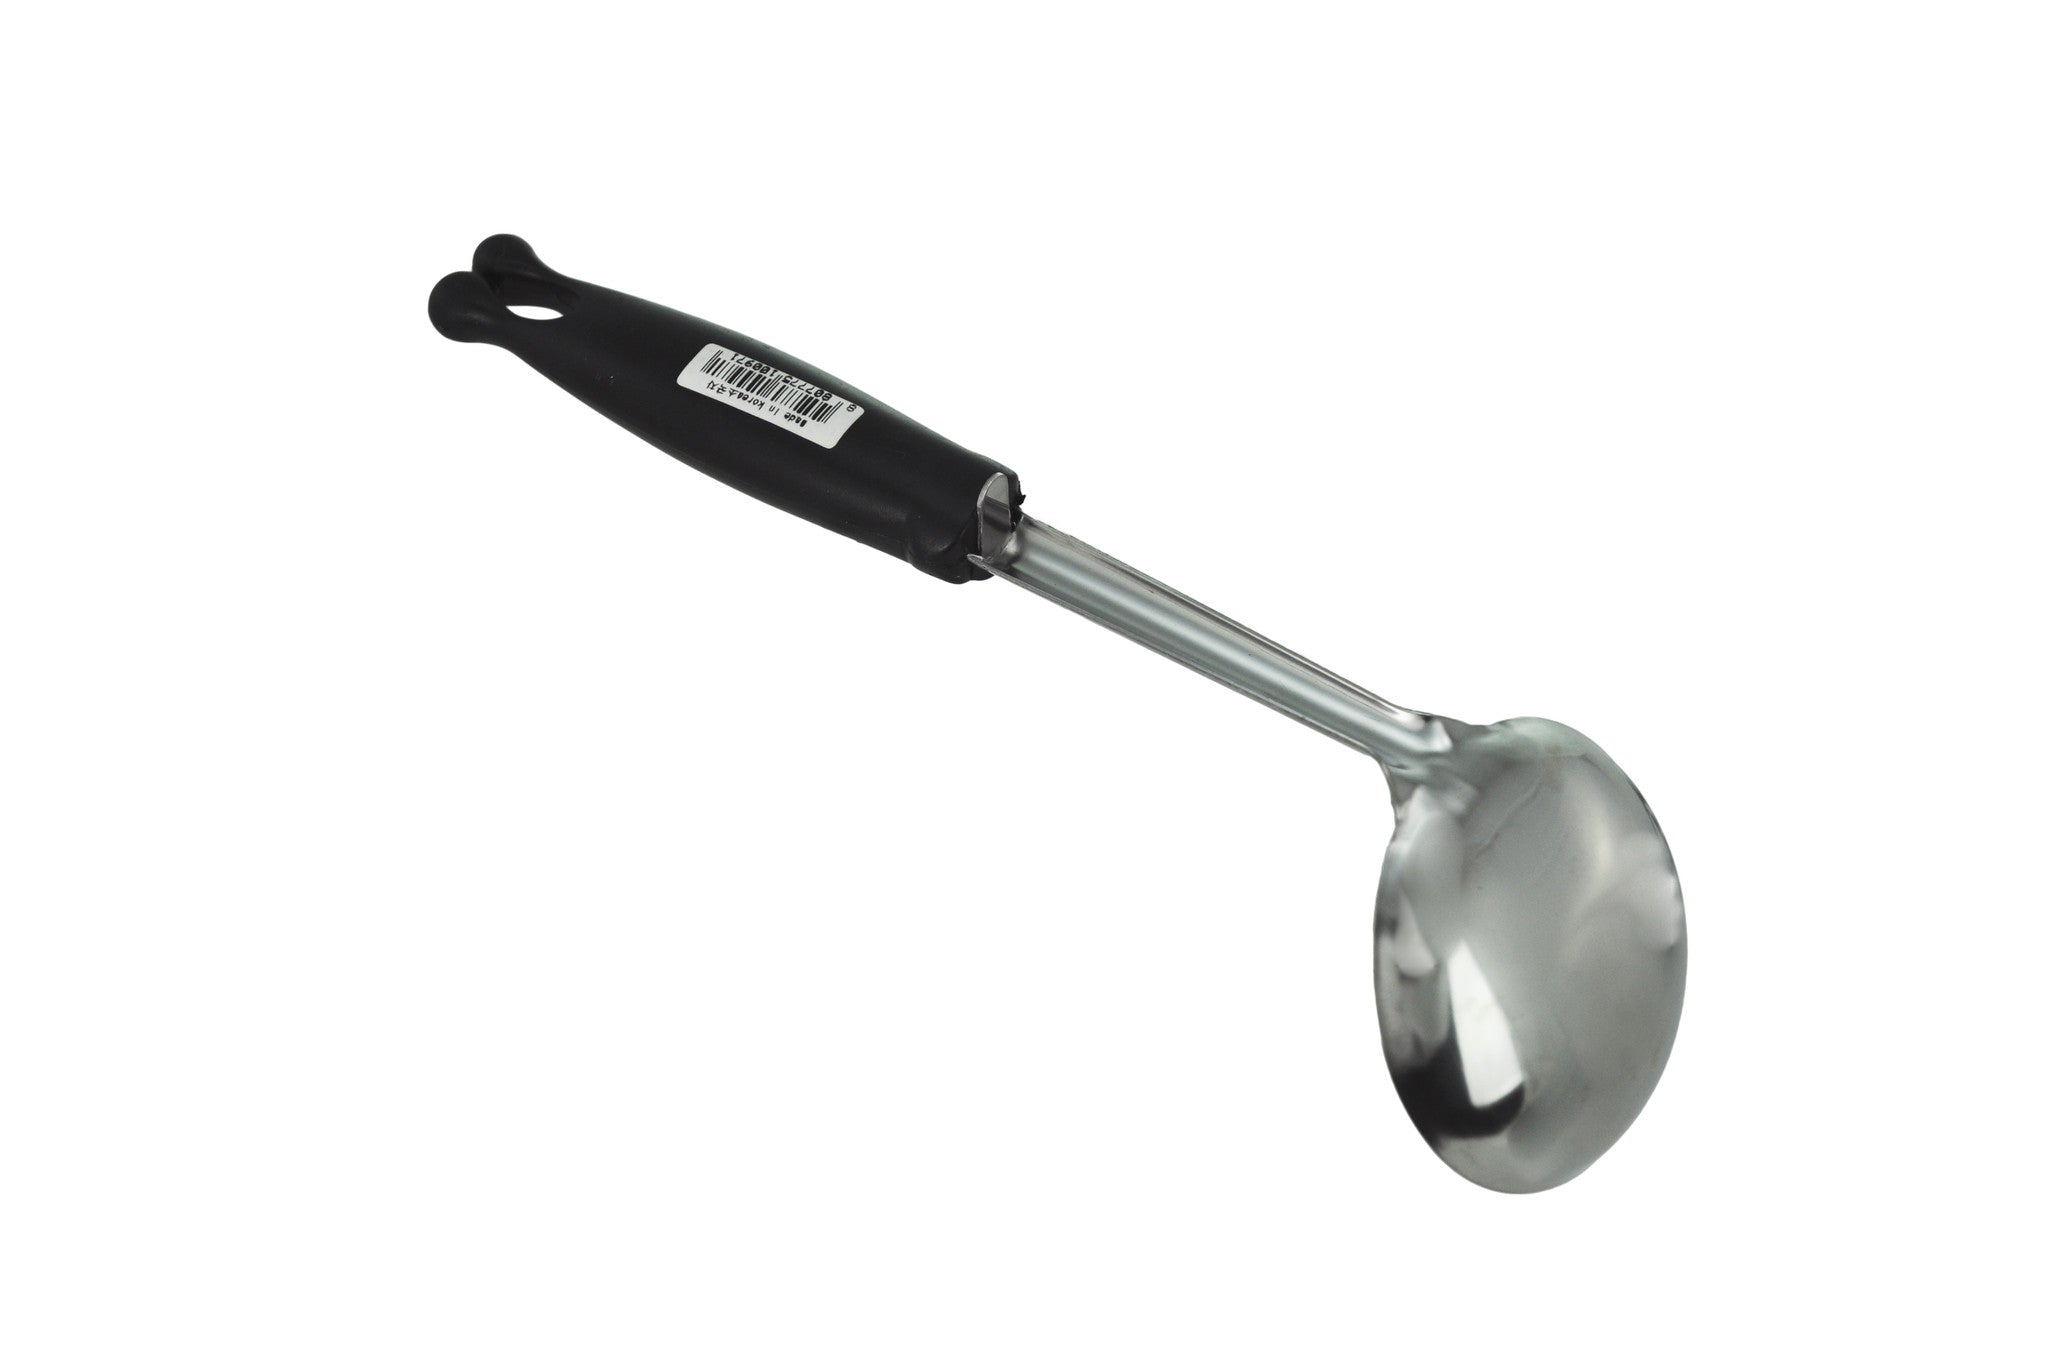 Stainless Steel Serving Ladle with Plastic Handle (국자), Kitchen Tools - eKitchenary